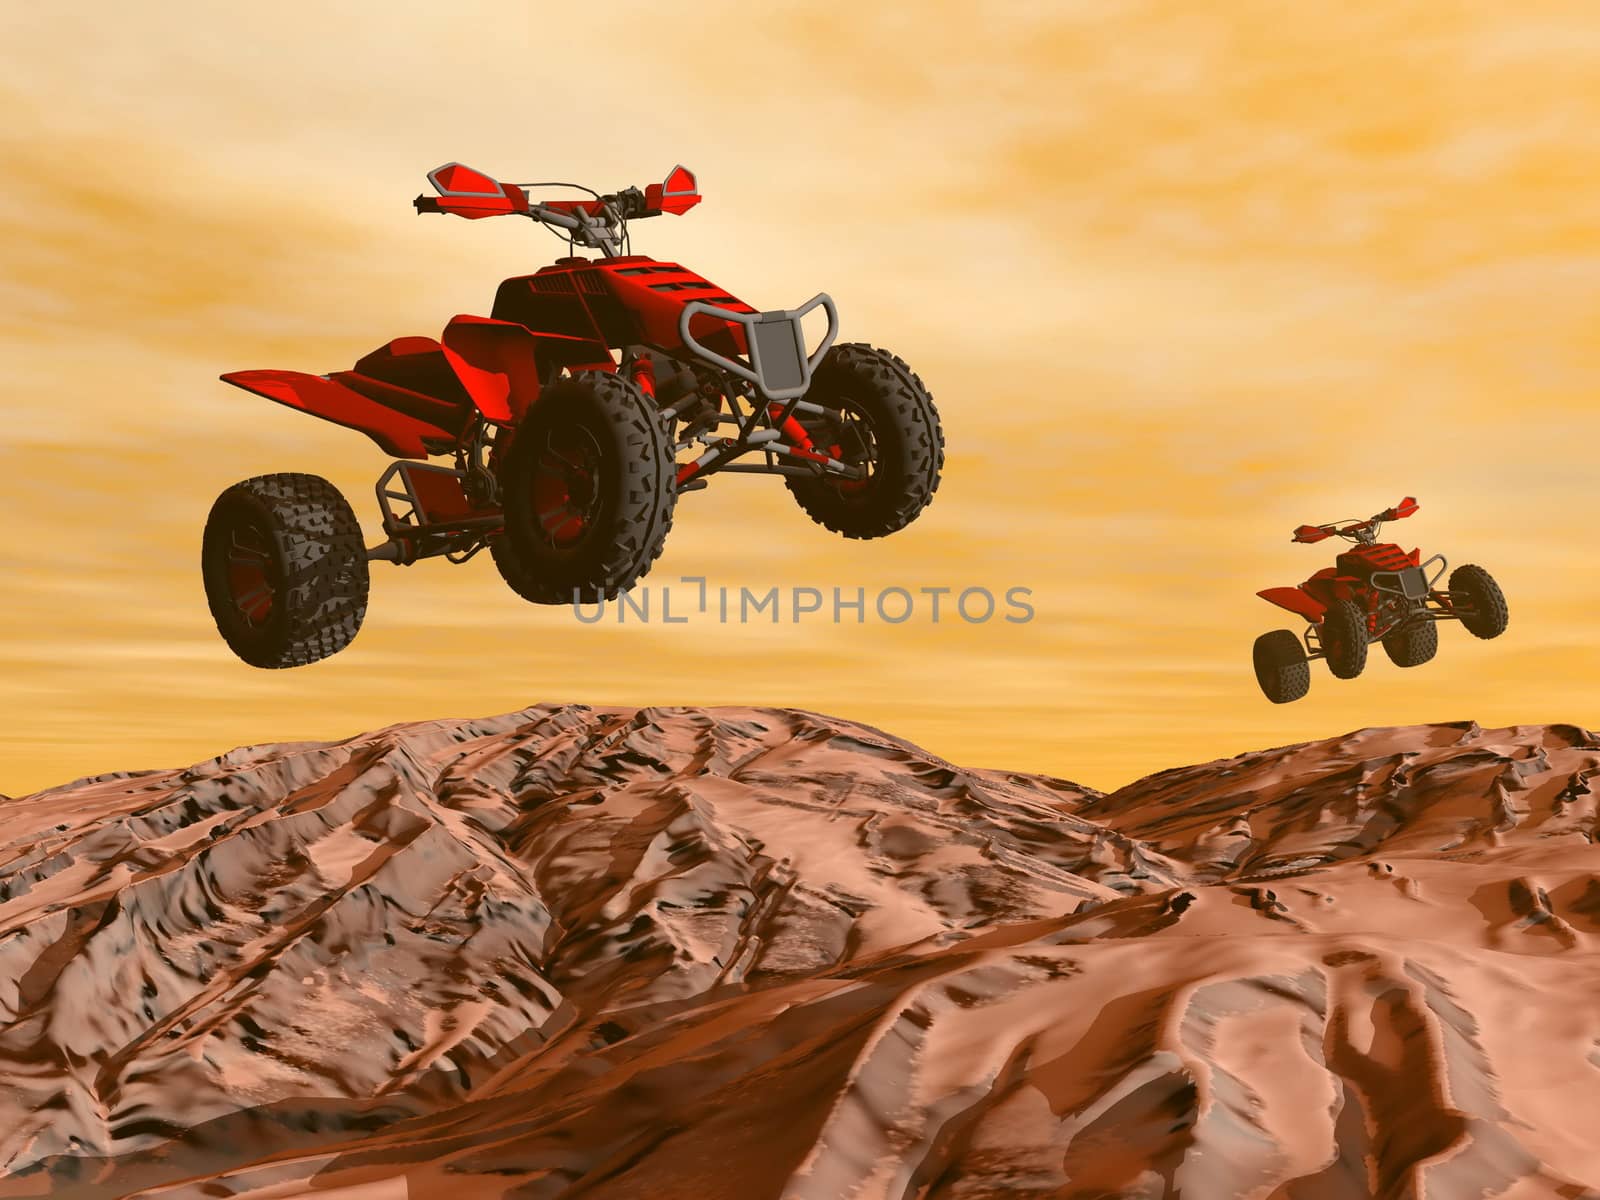 Two all terrain vehicle quads jumping in the desert by sunset